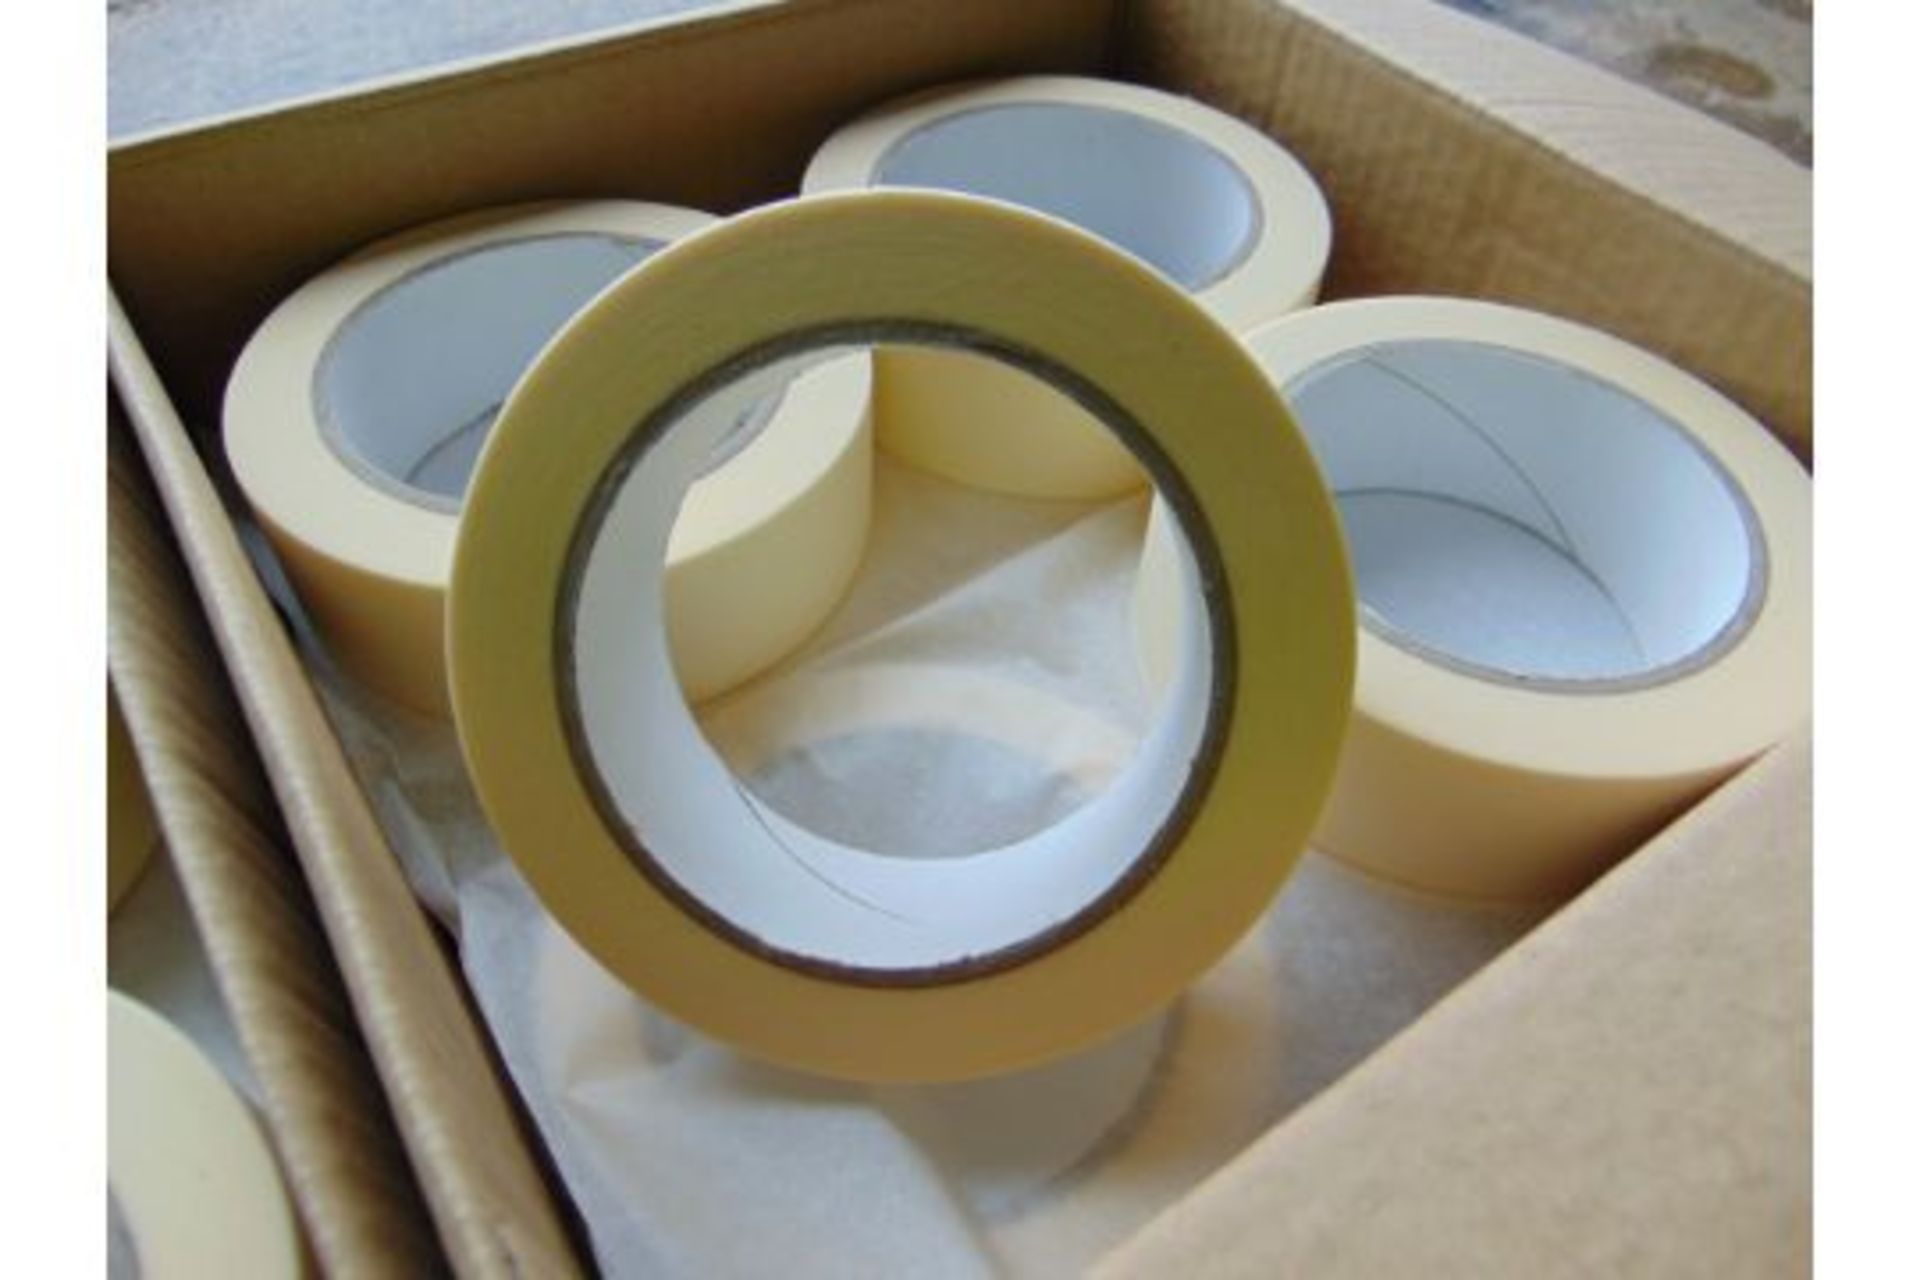 48 Rolls of Masking Tape - 36mm x 50m New from UK MOD - Image 4 of 6